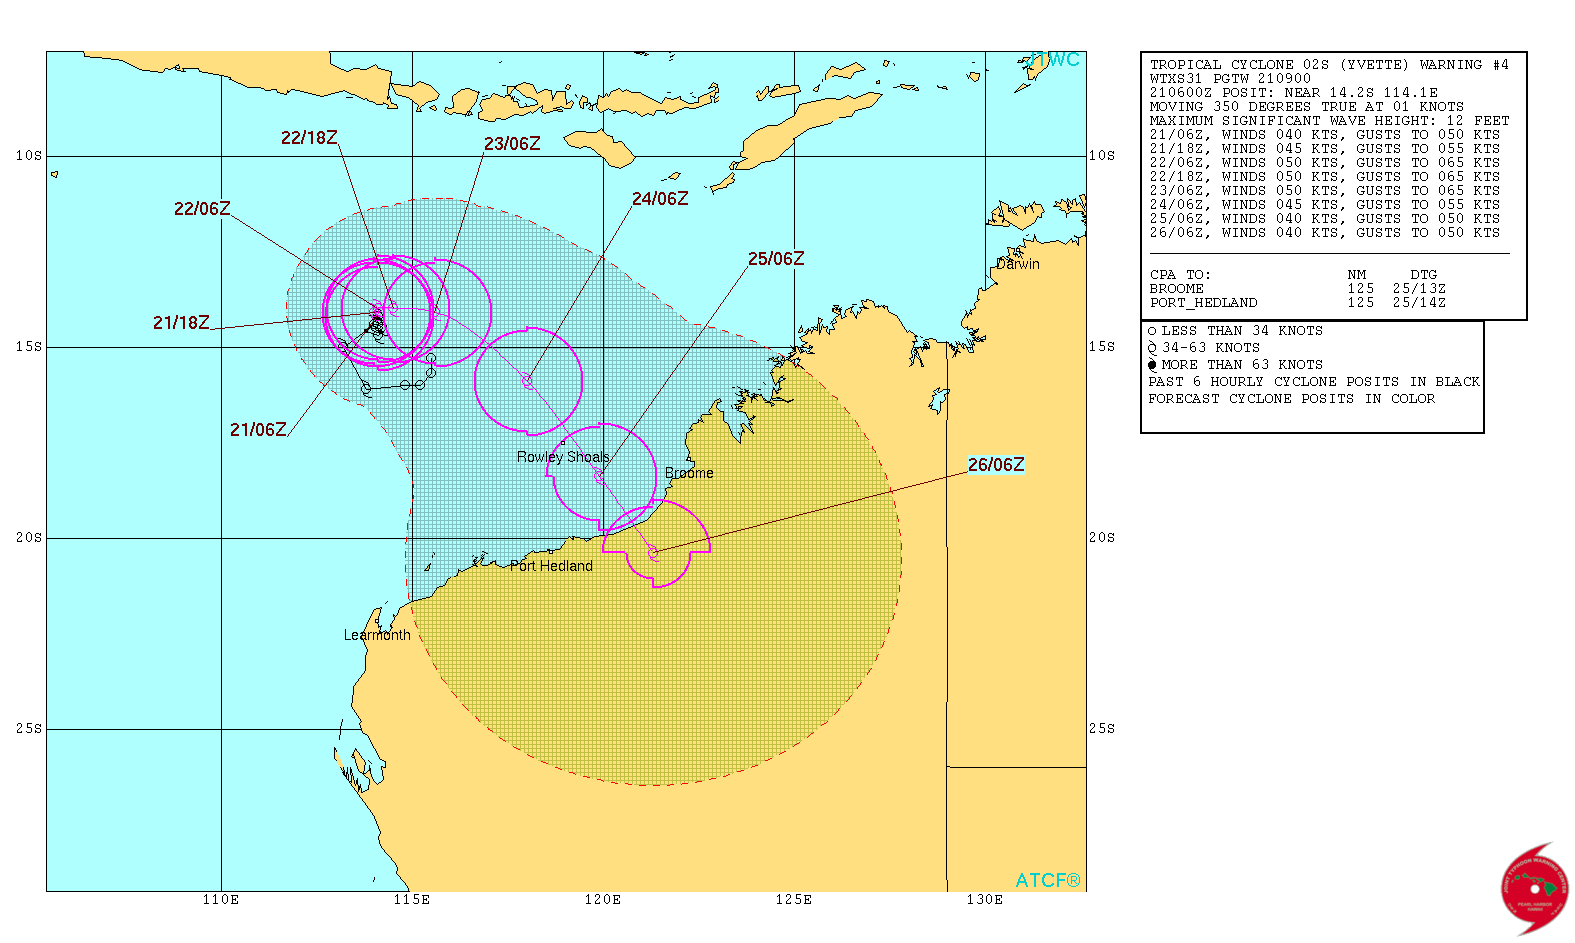 Tropical Cyclone Yvette 5-day forecast track as of December 21, 2016